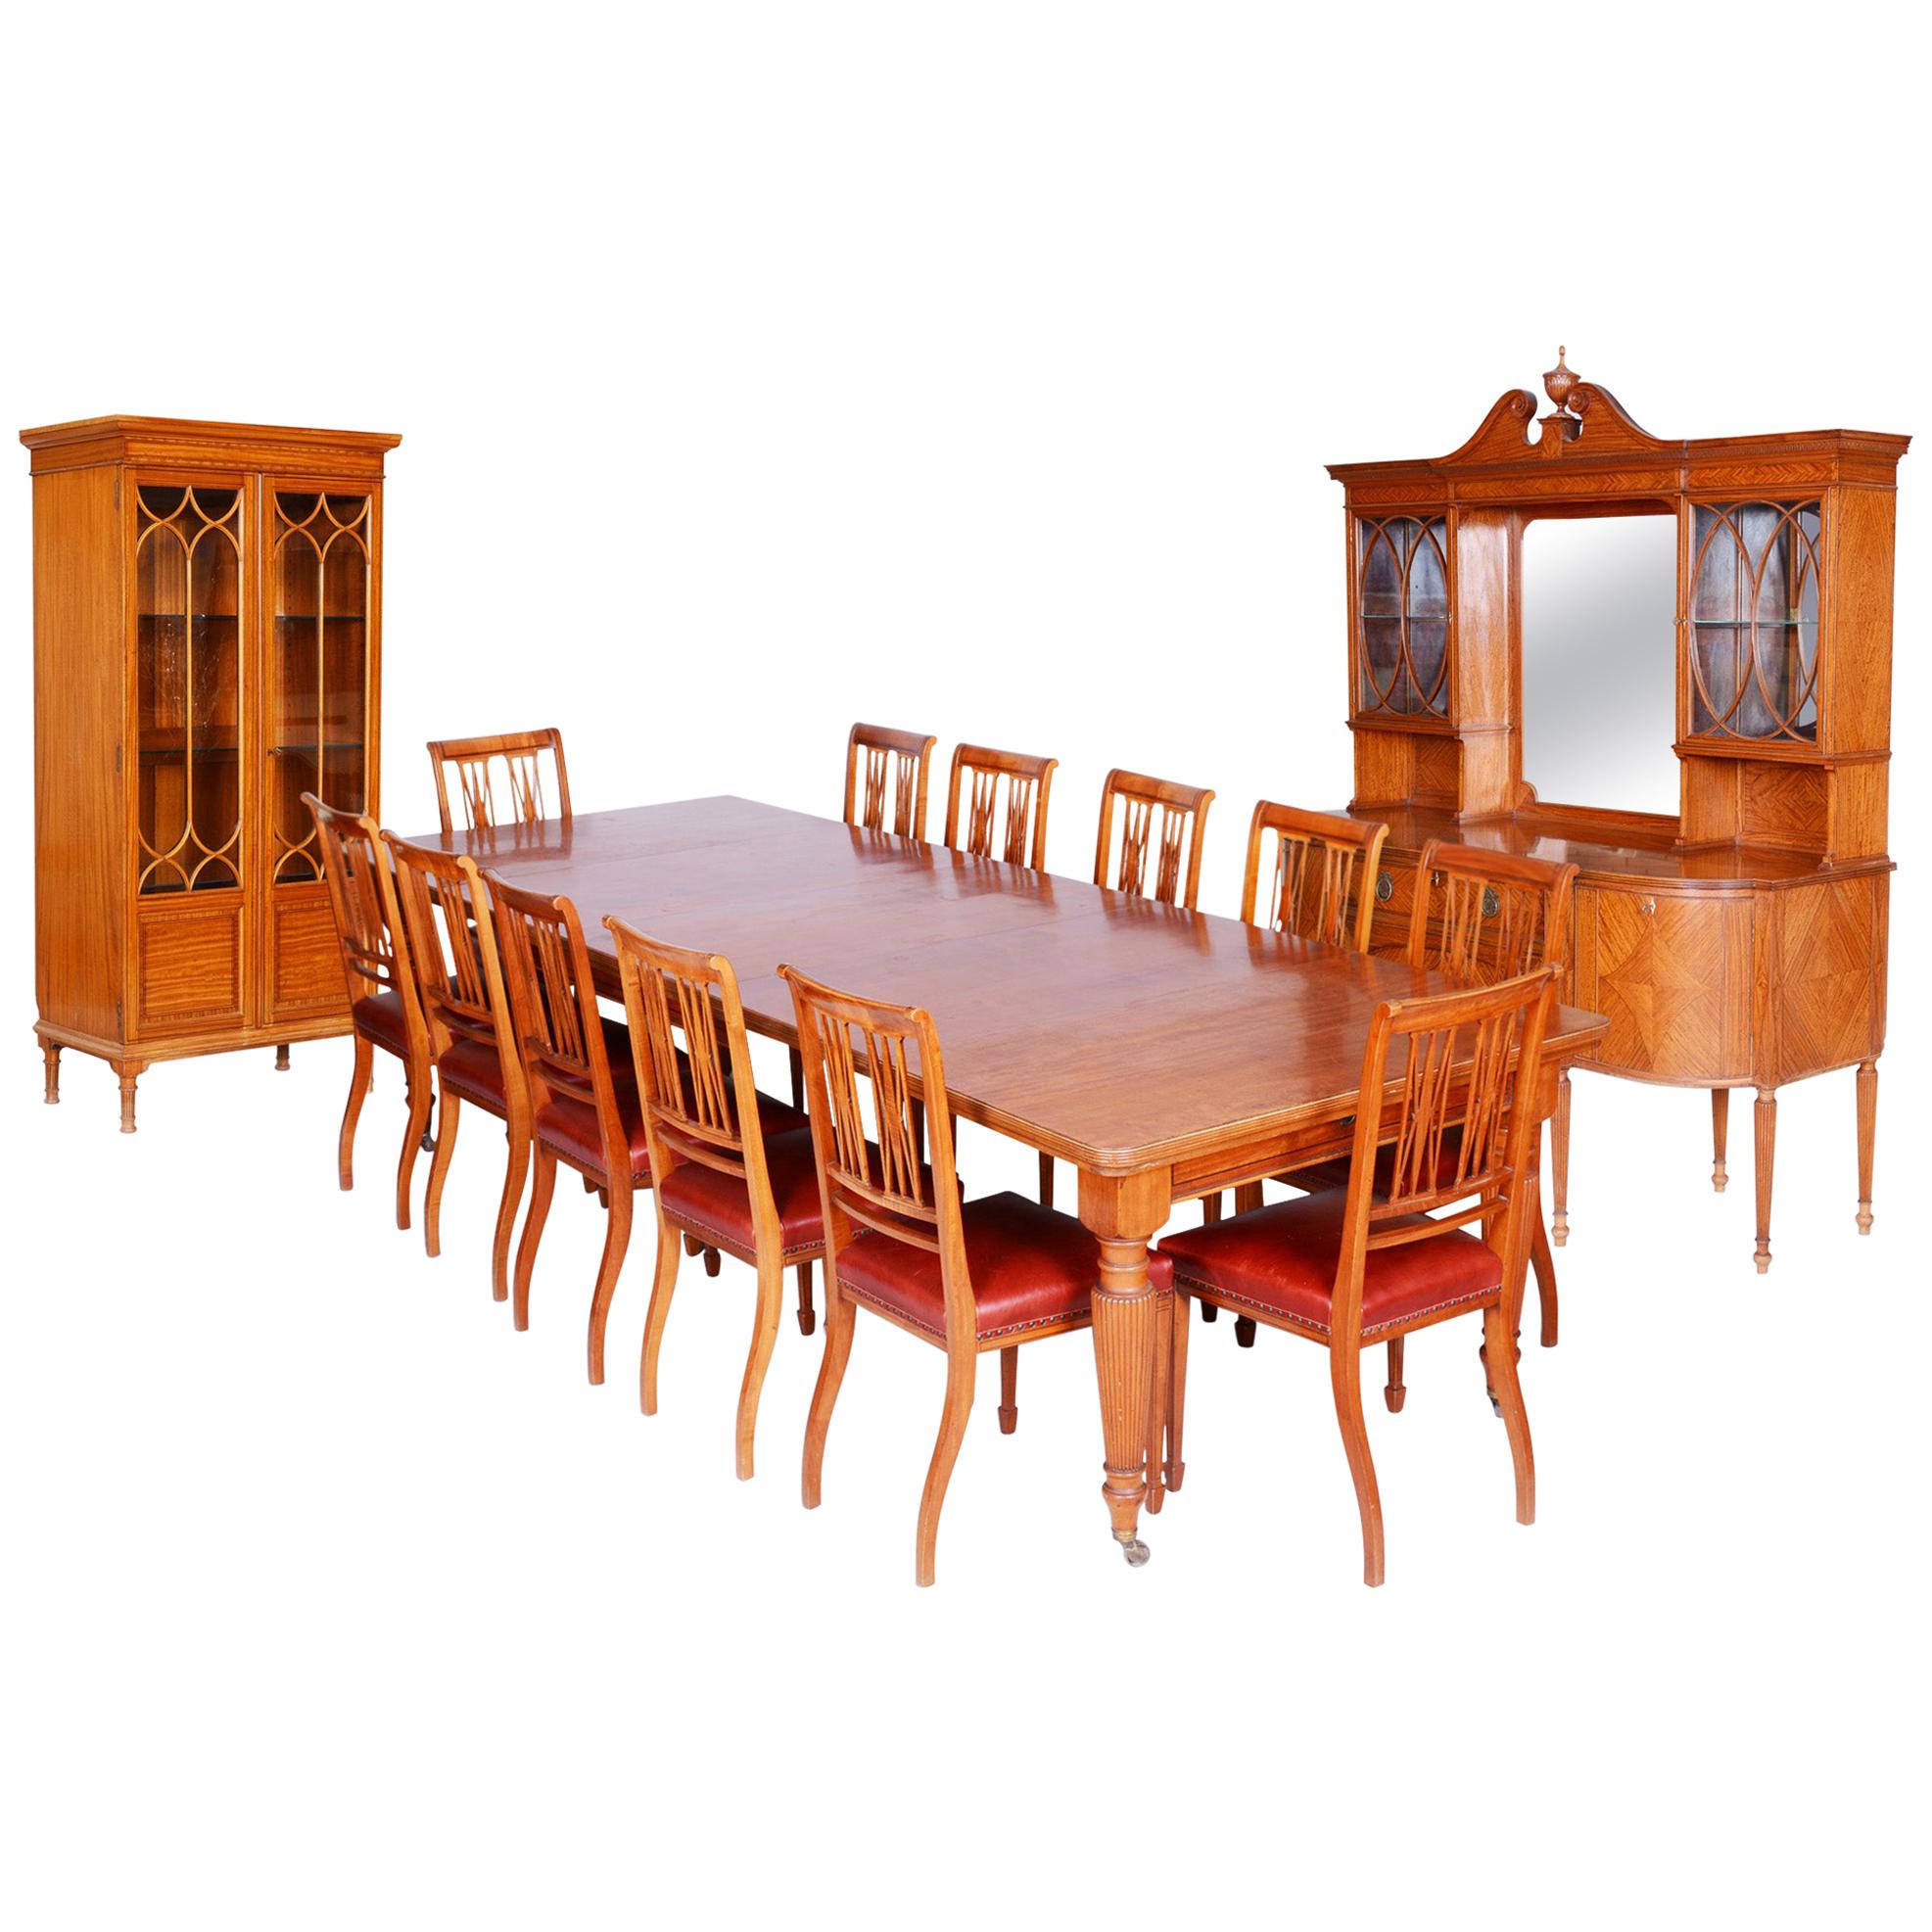 19th Century Original Rare British Dinning Room Set with 12 Chairs, Satin Wood For Sale